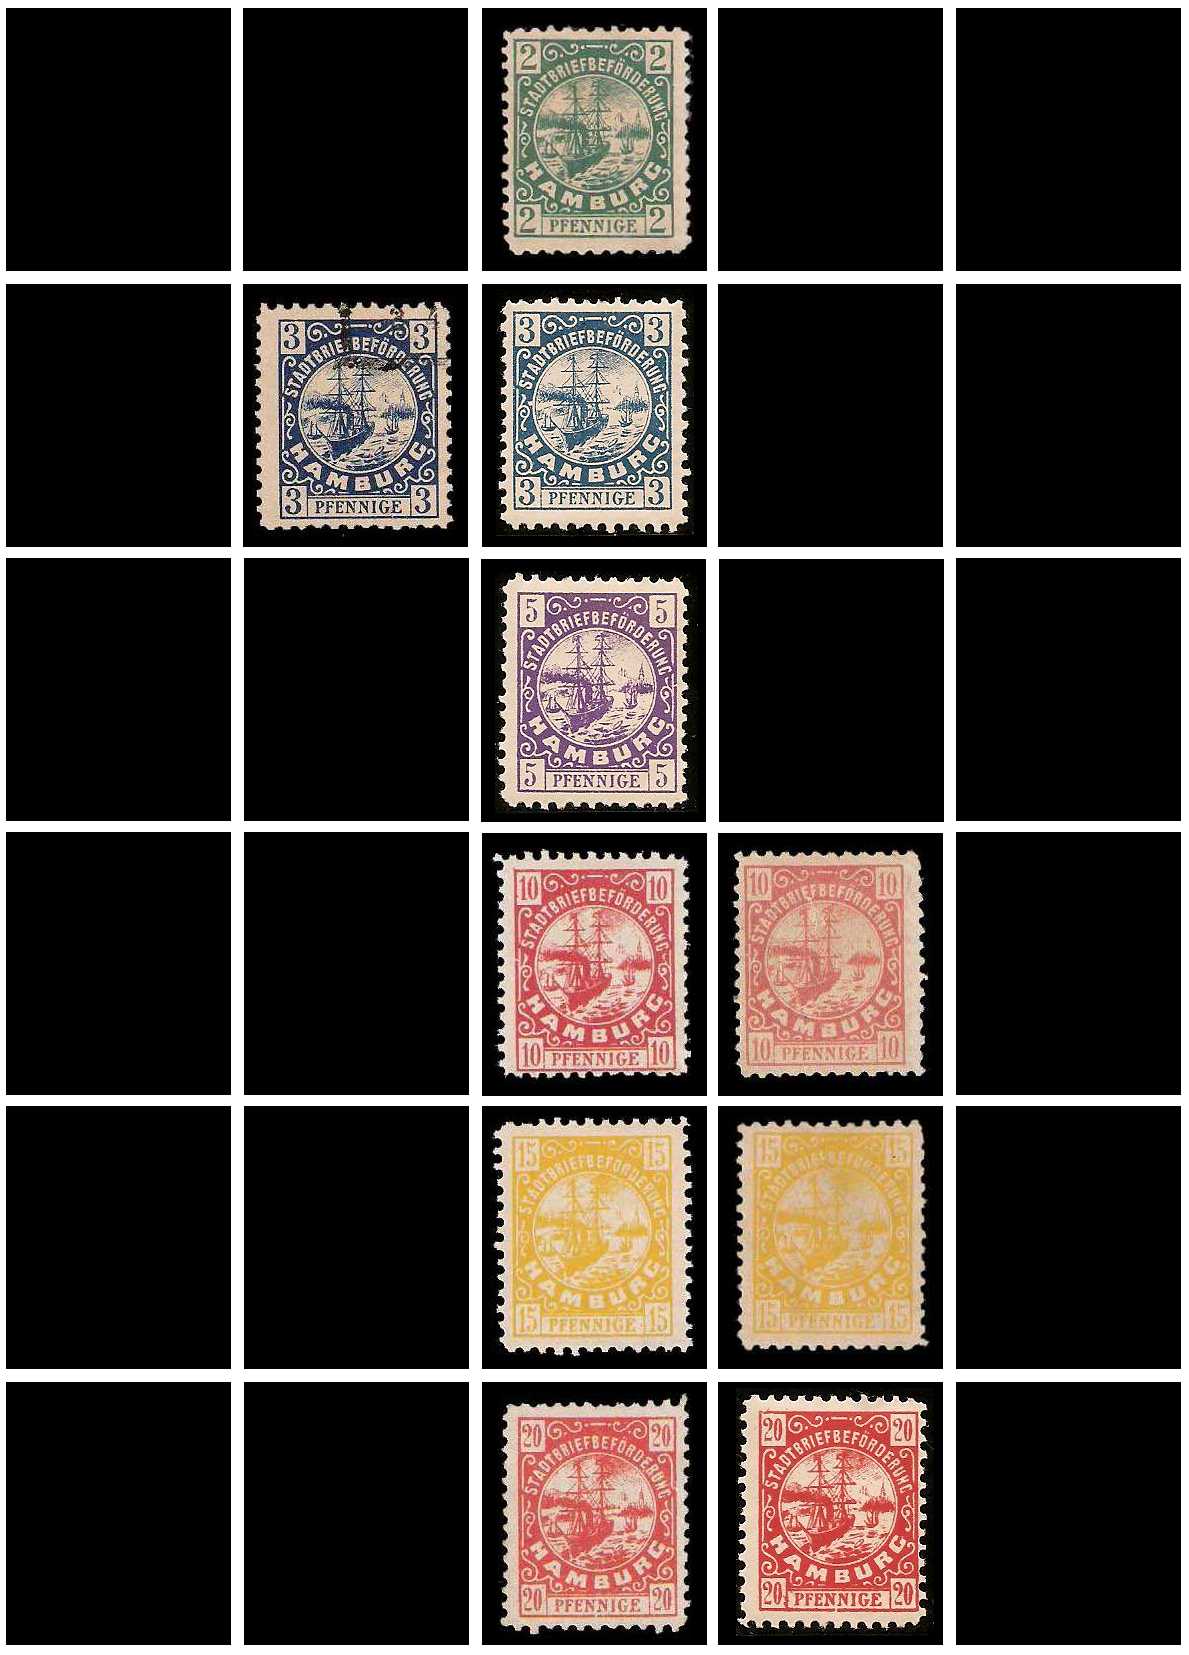 8.1887 Germany Private Mail Hamburg Mi D 10/16 collection 01